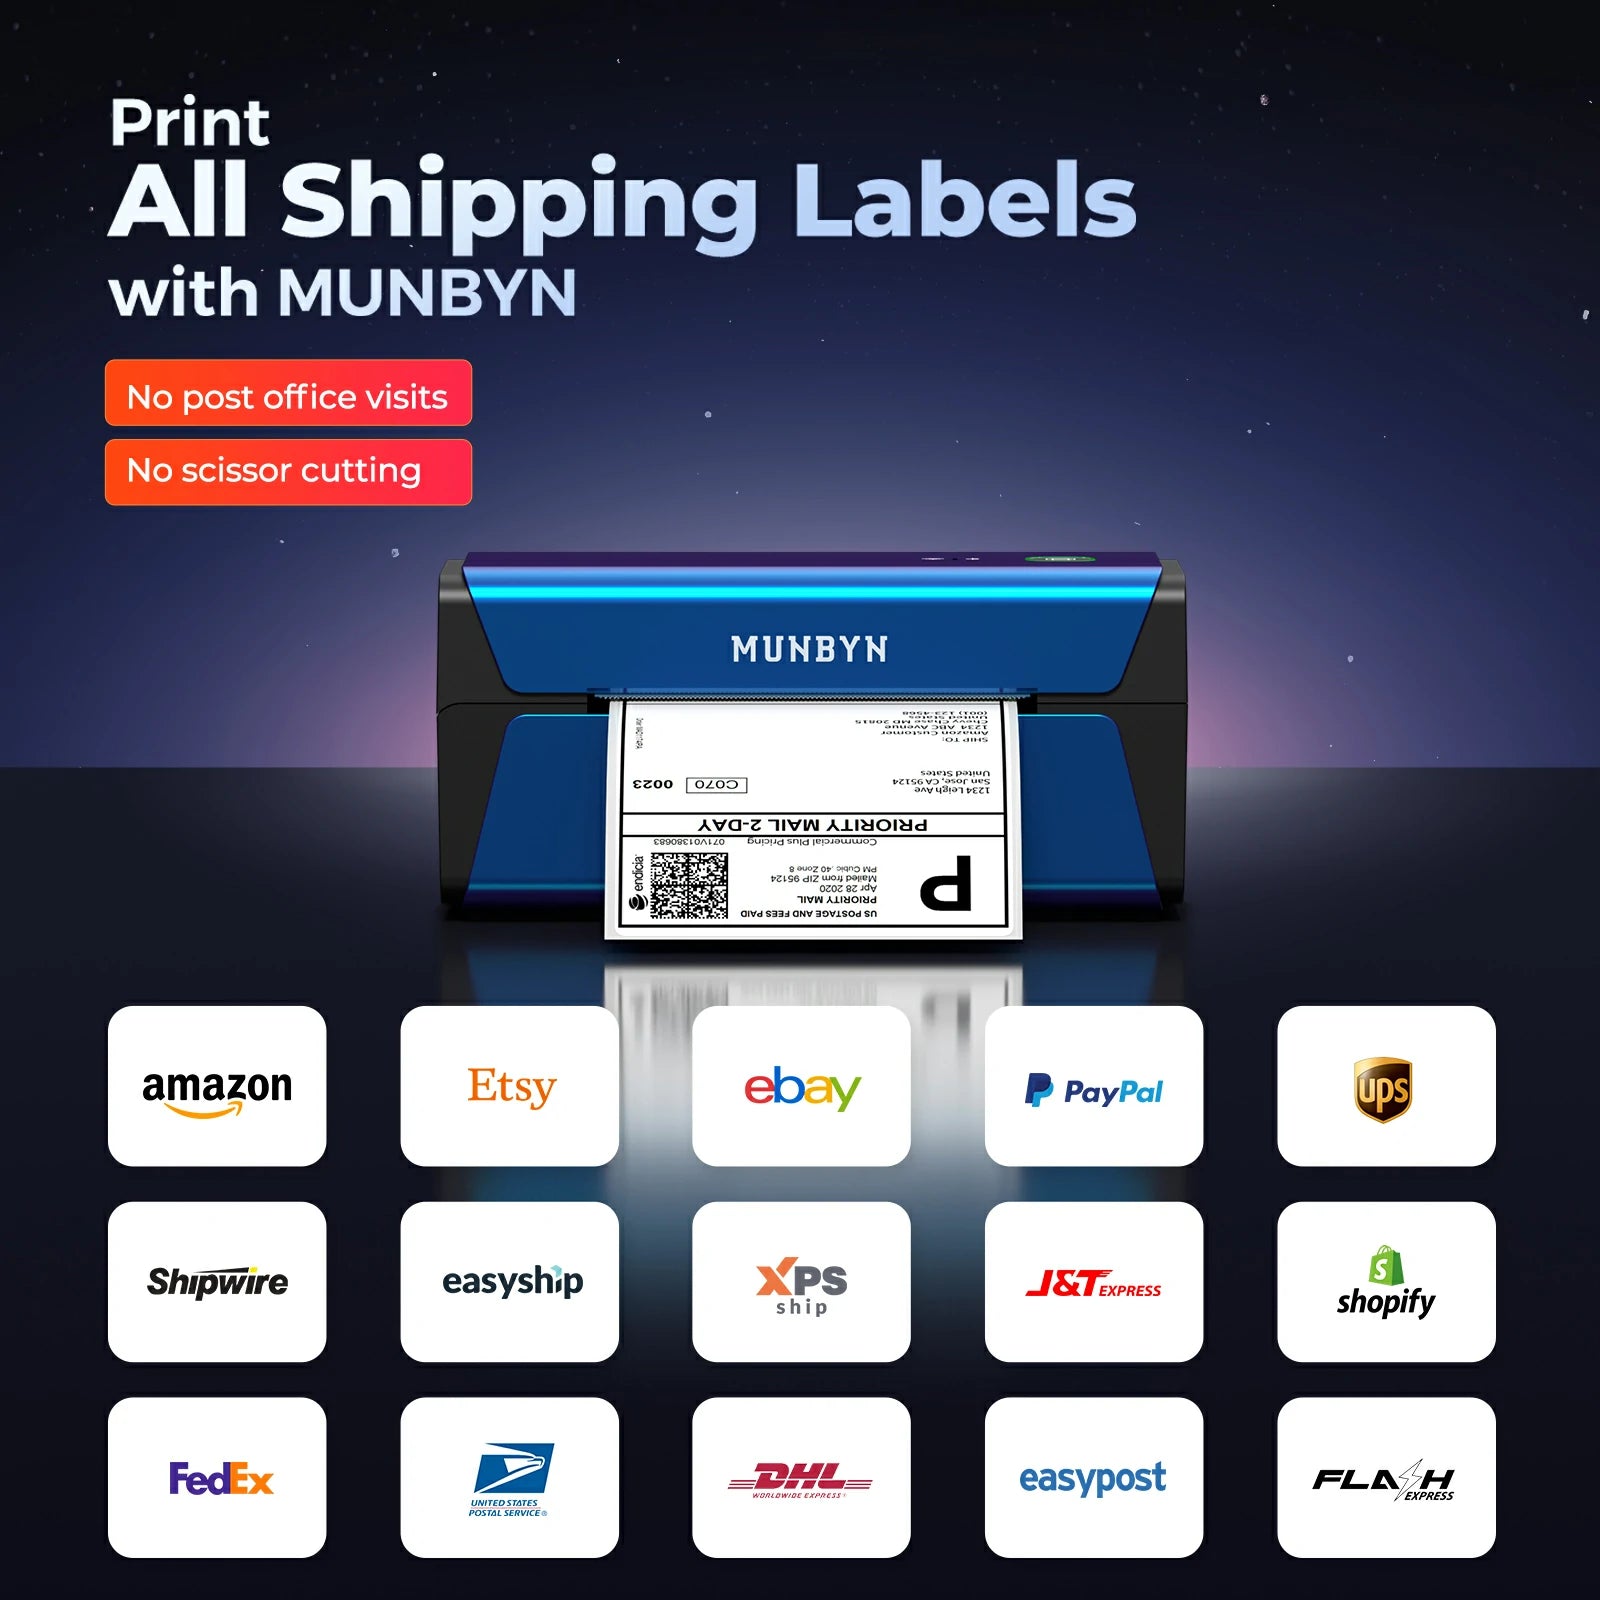 It is capable of printing shipping labels compatible with most shipping and shopping platforms.